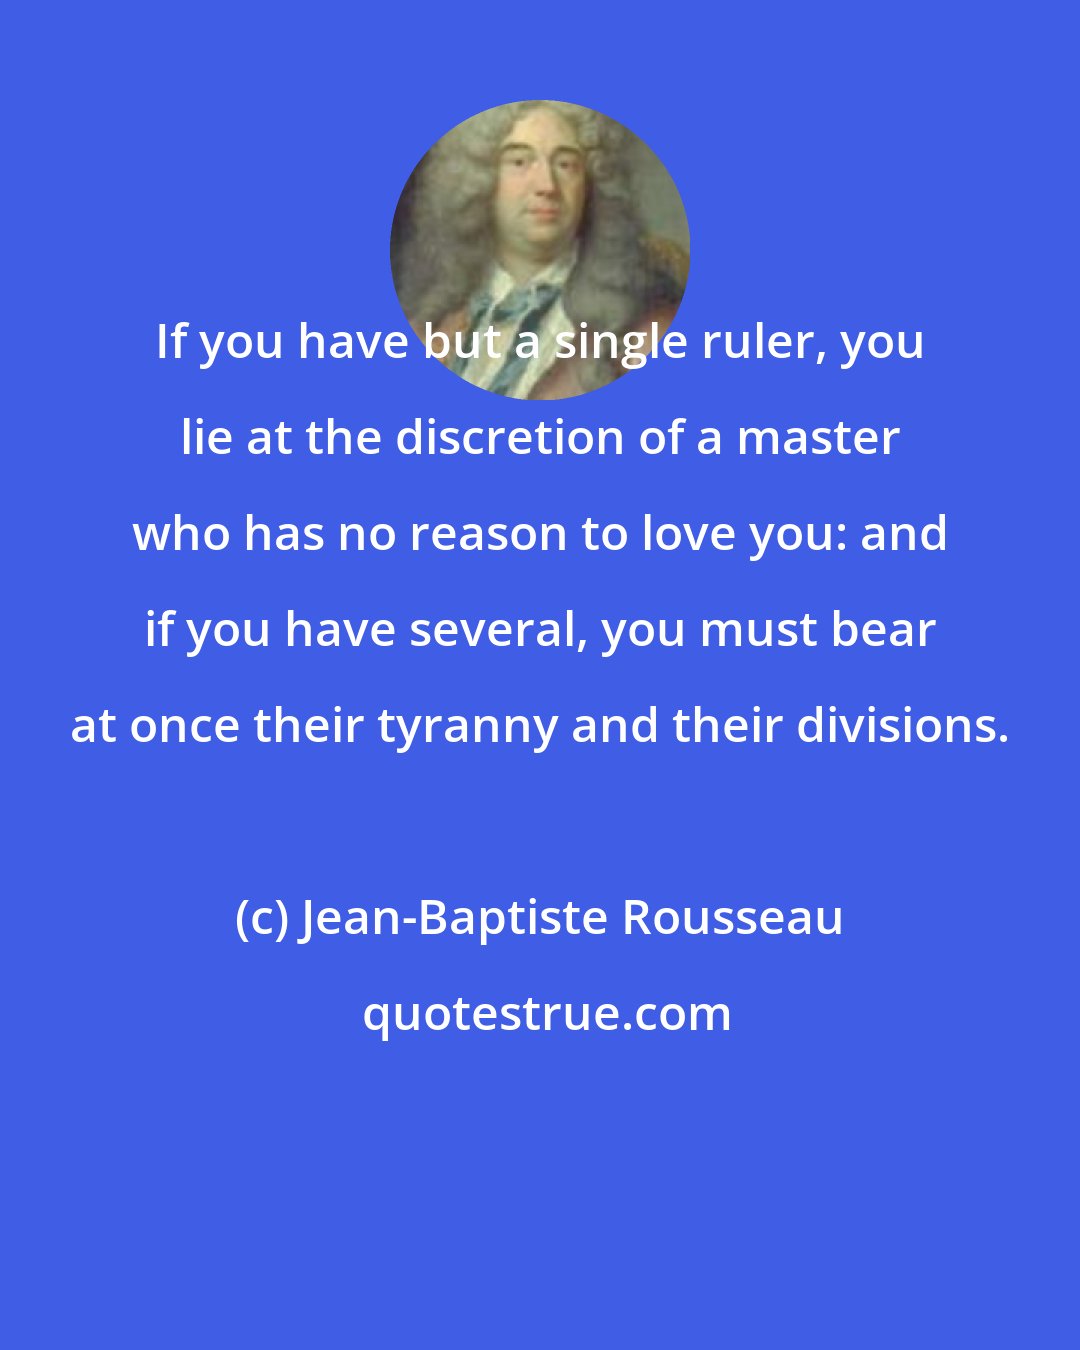 Jean-Baptiste Rousseau: If you have but a single ruler, you lie at the discretion of a master who has no reason to love you: and if you have several, you must bear at once their tyranny and their divisions.